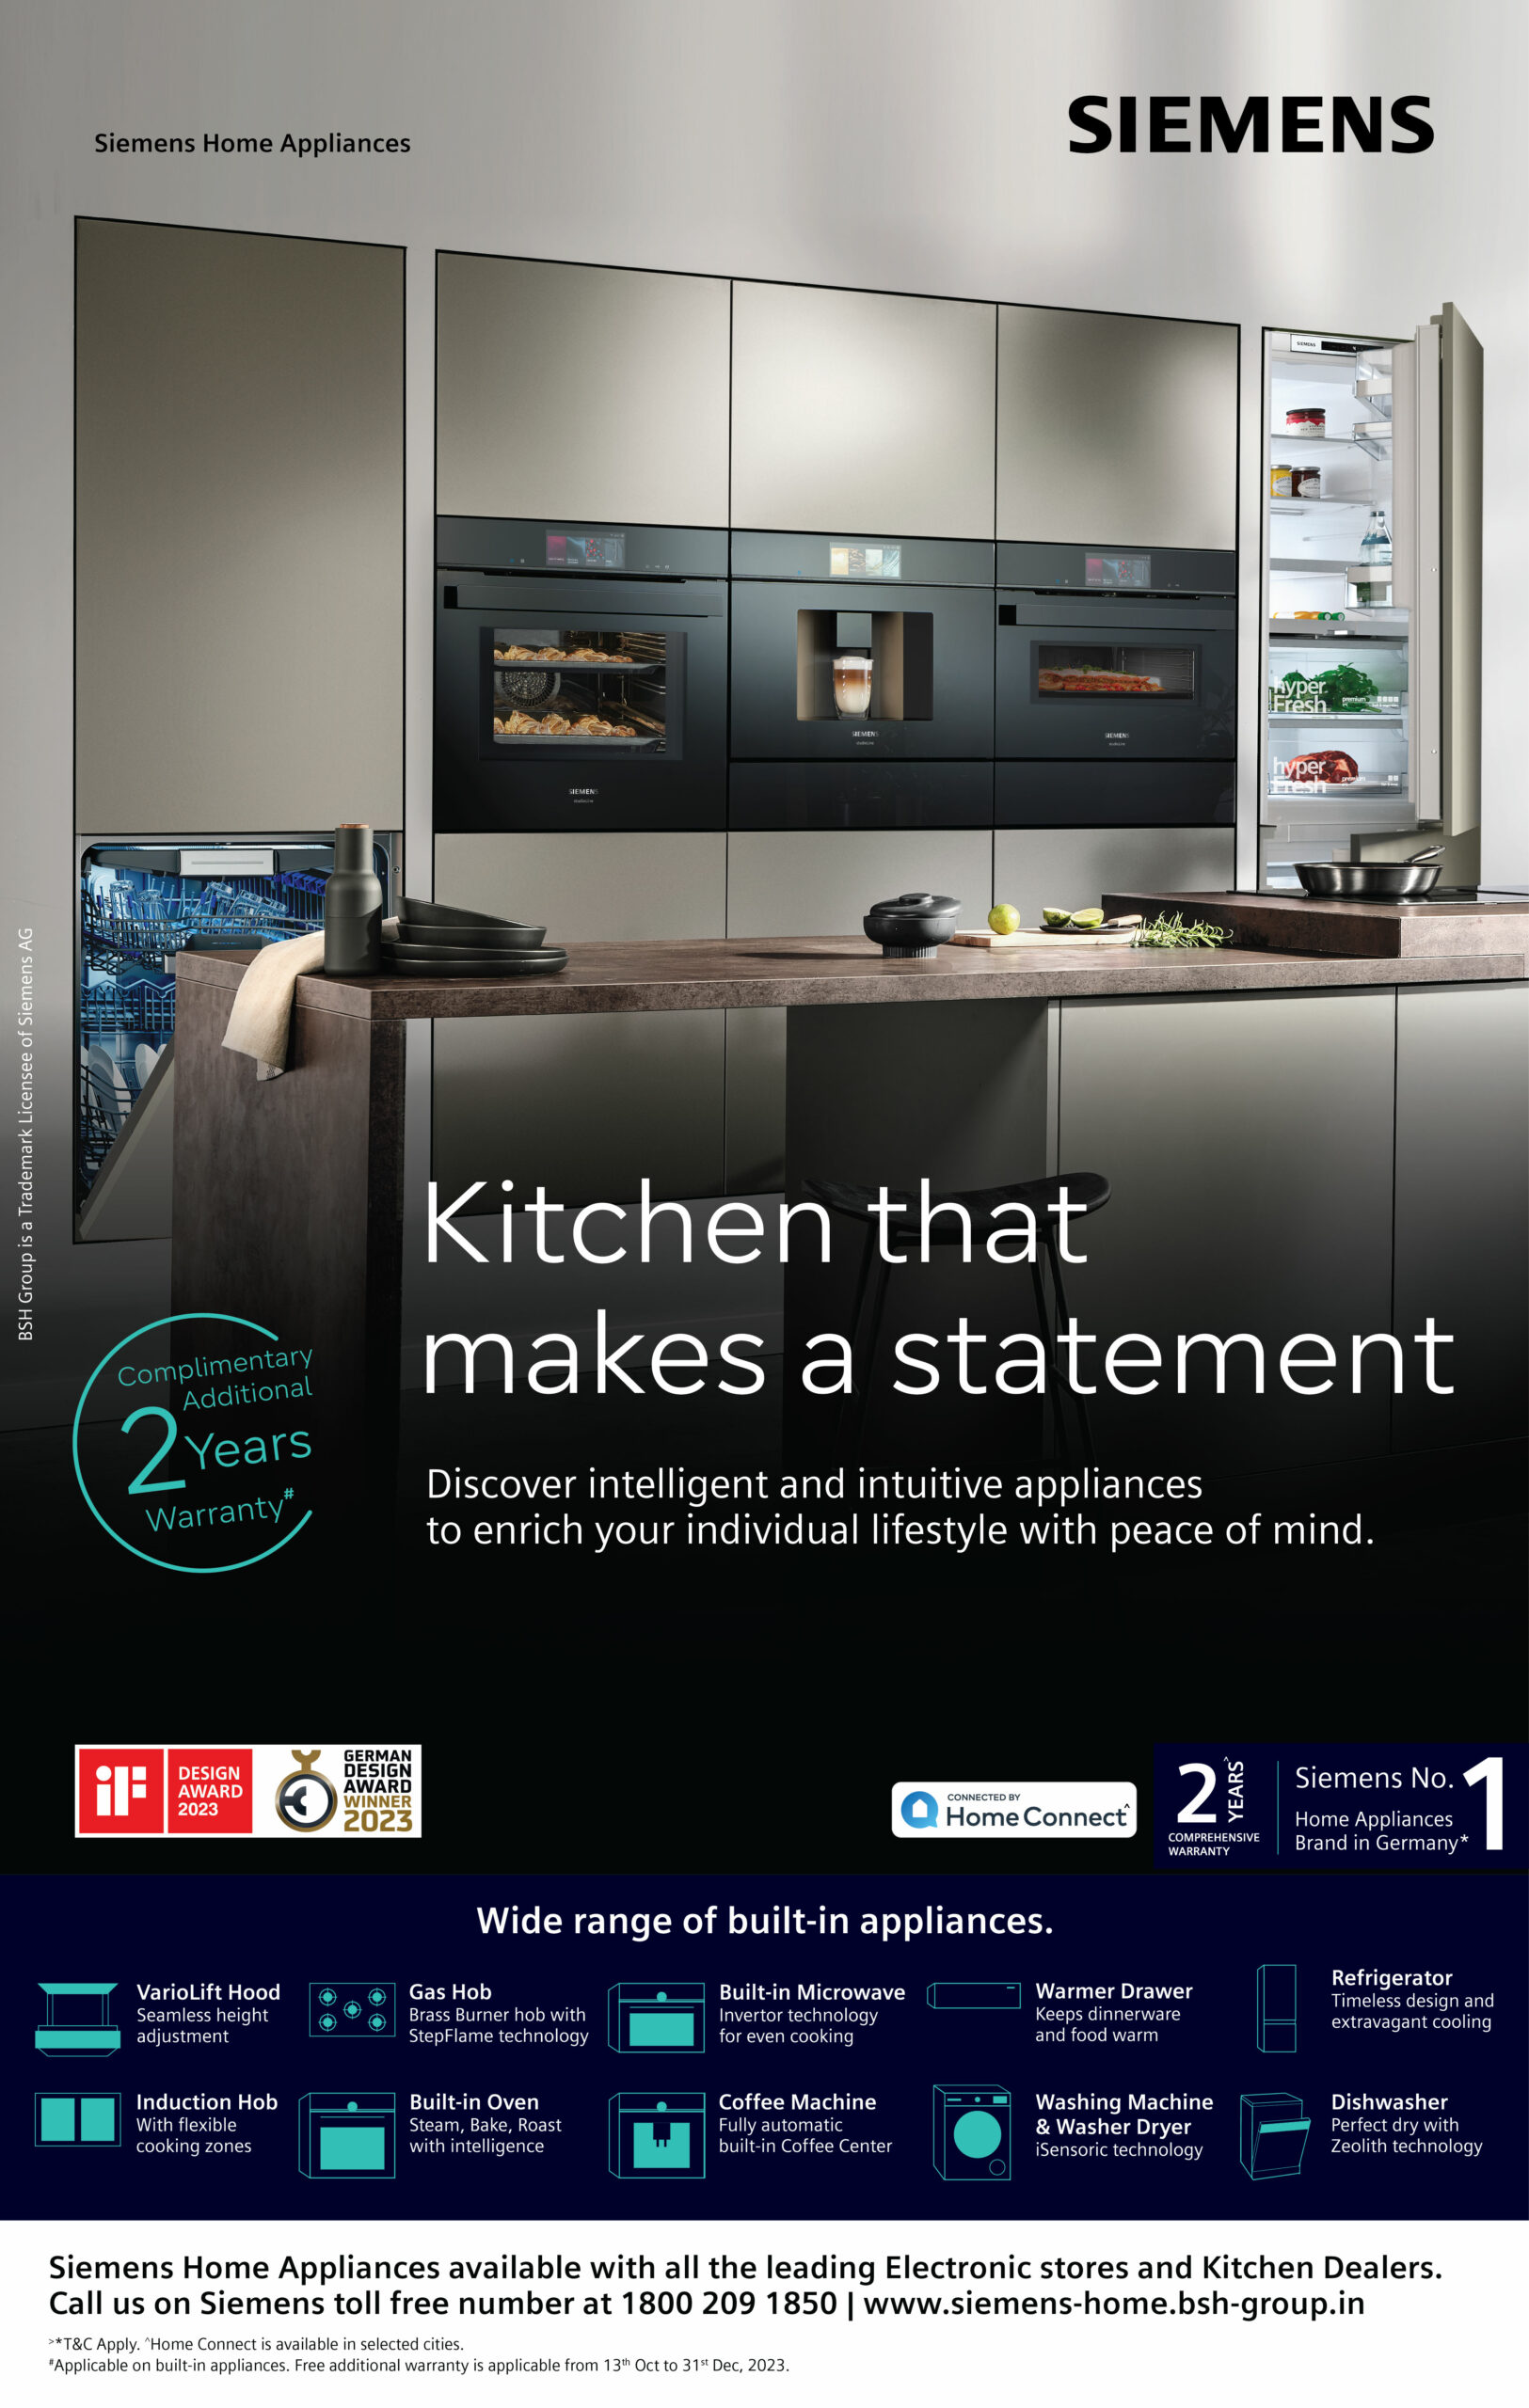 BSH ،me appliances India presents an exclusive 2-year extended warranty program for Siemens built-in appliances